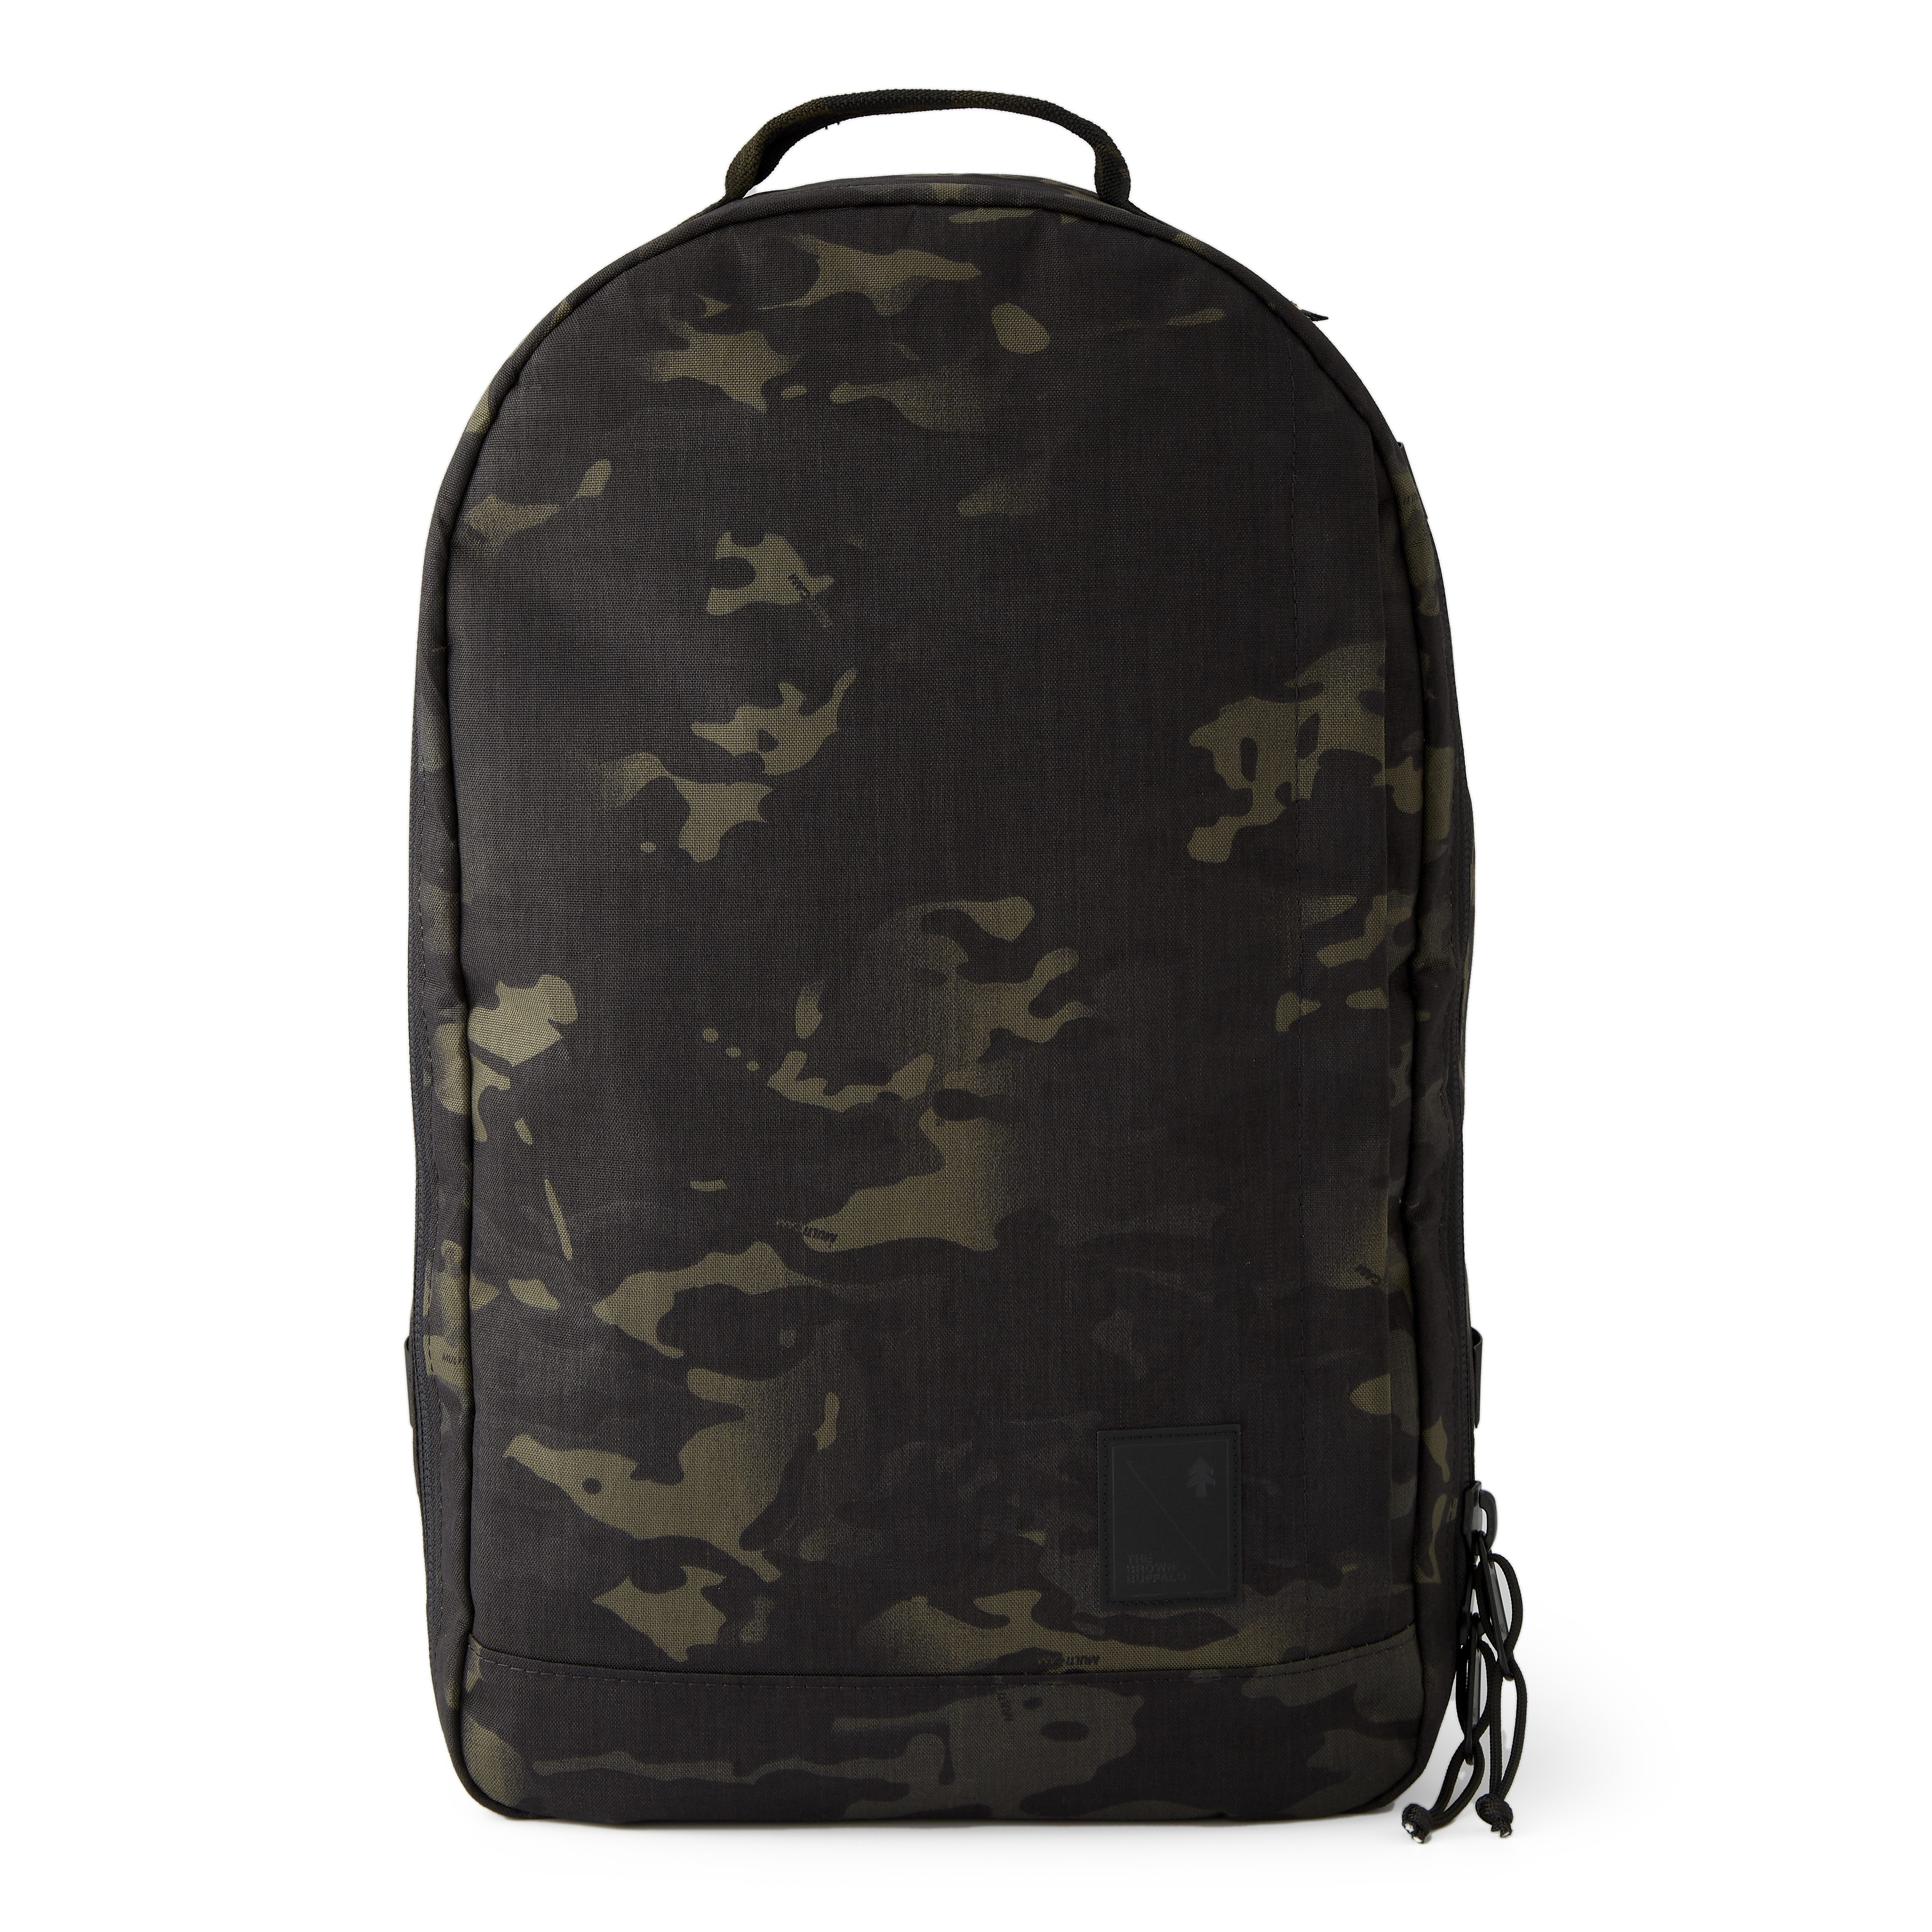 Concealpack Everyday Backpack 21L - Exclusive